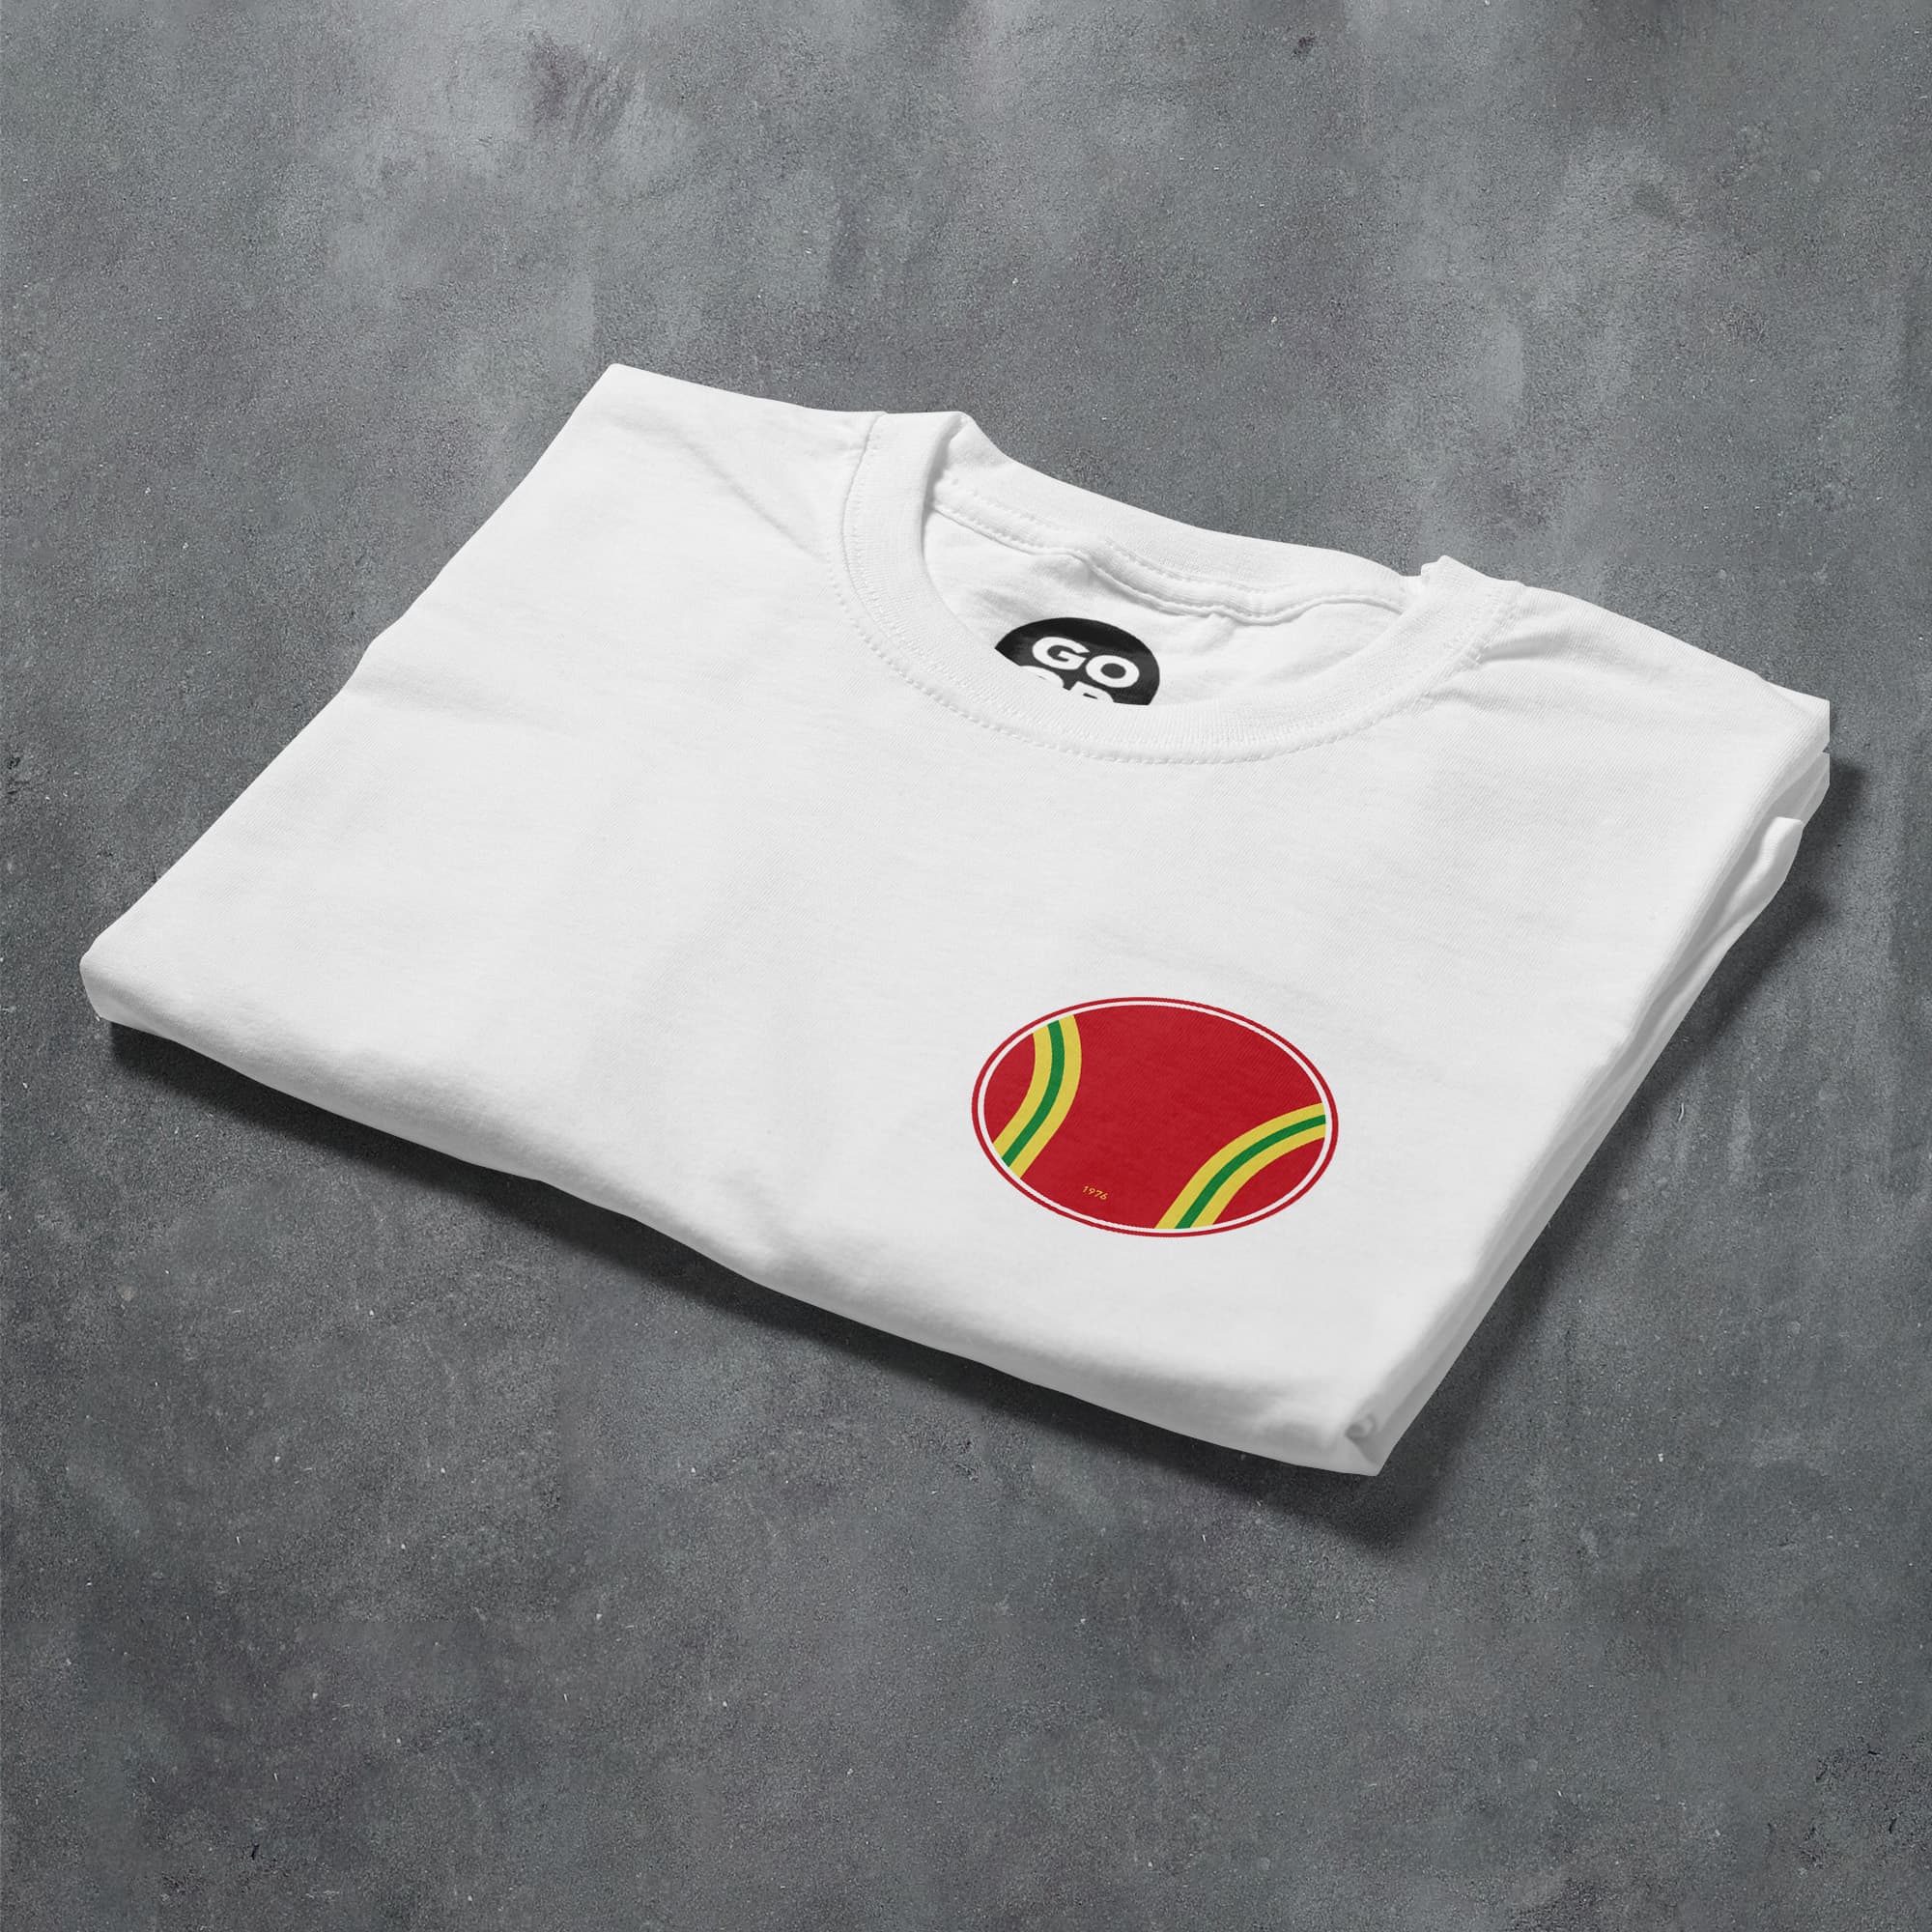 a white t - shirt with a red tennis ball on it